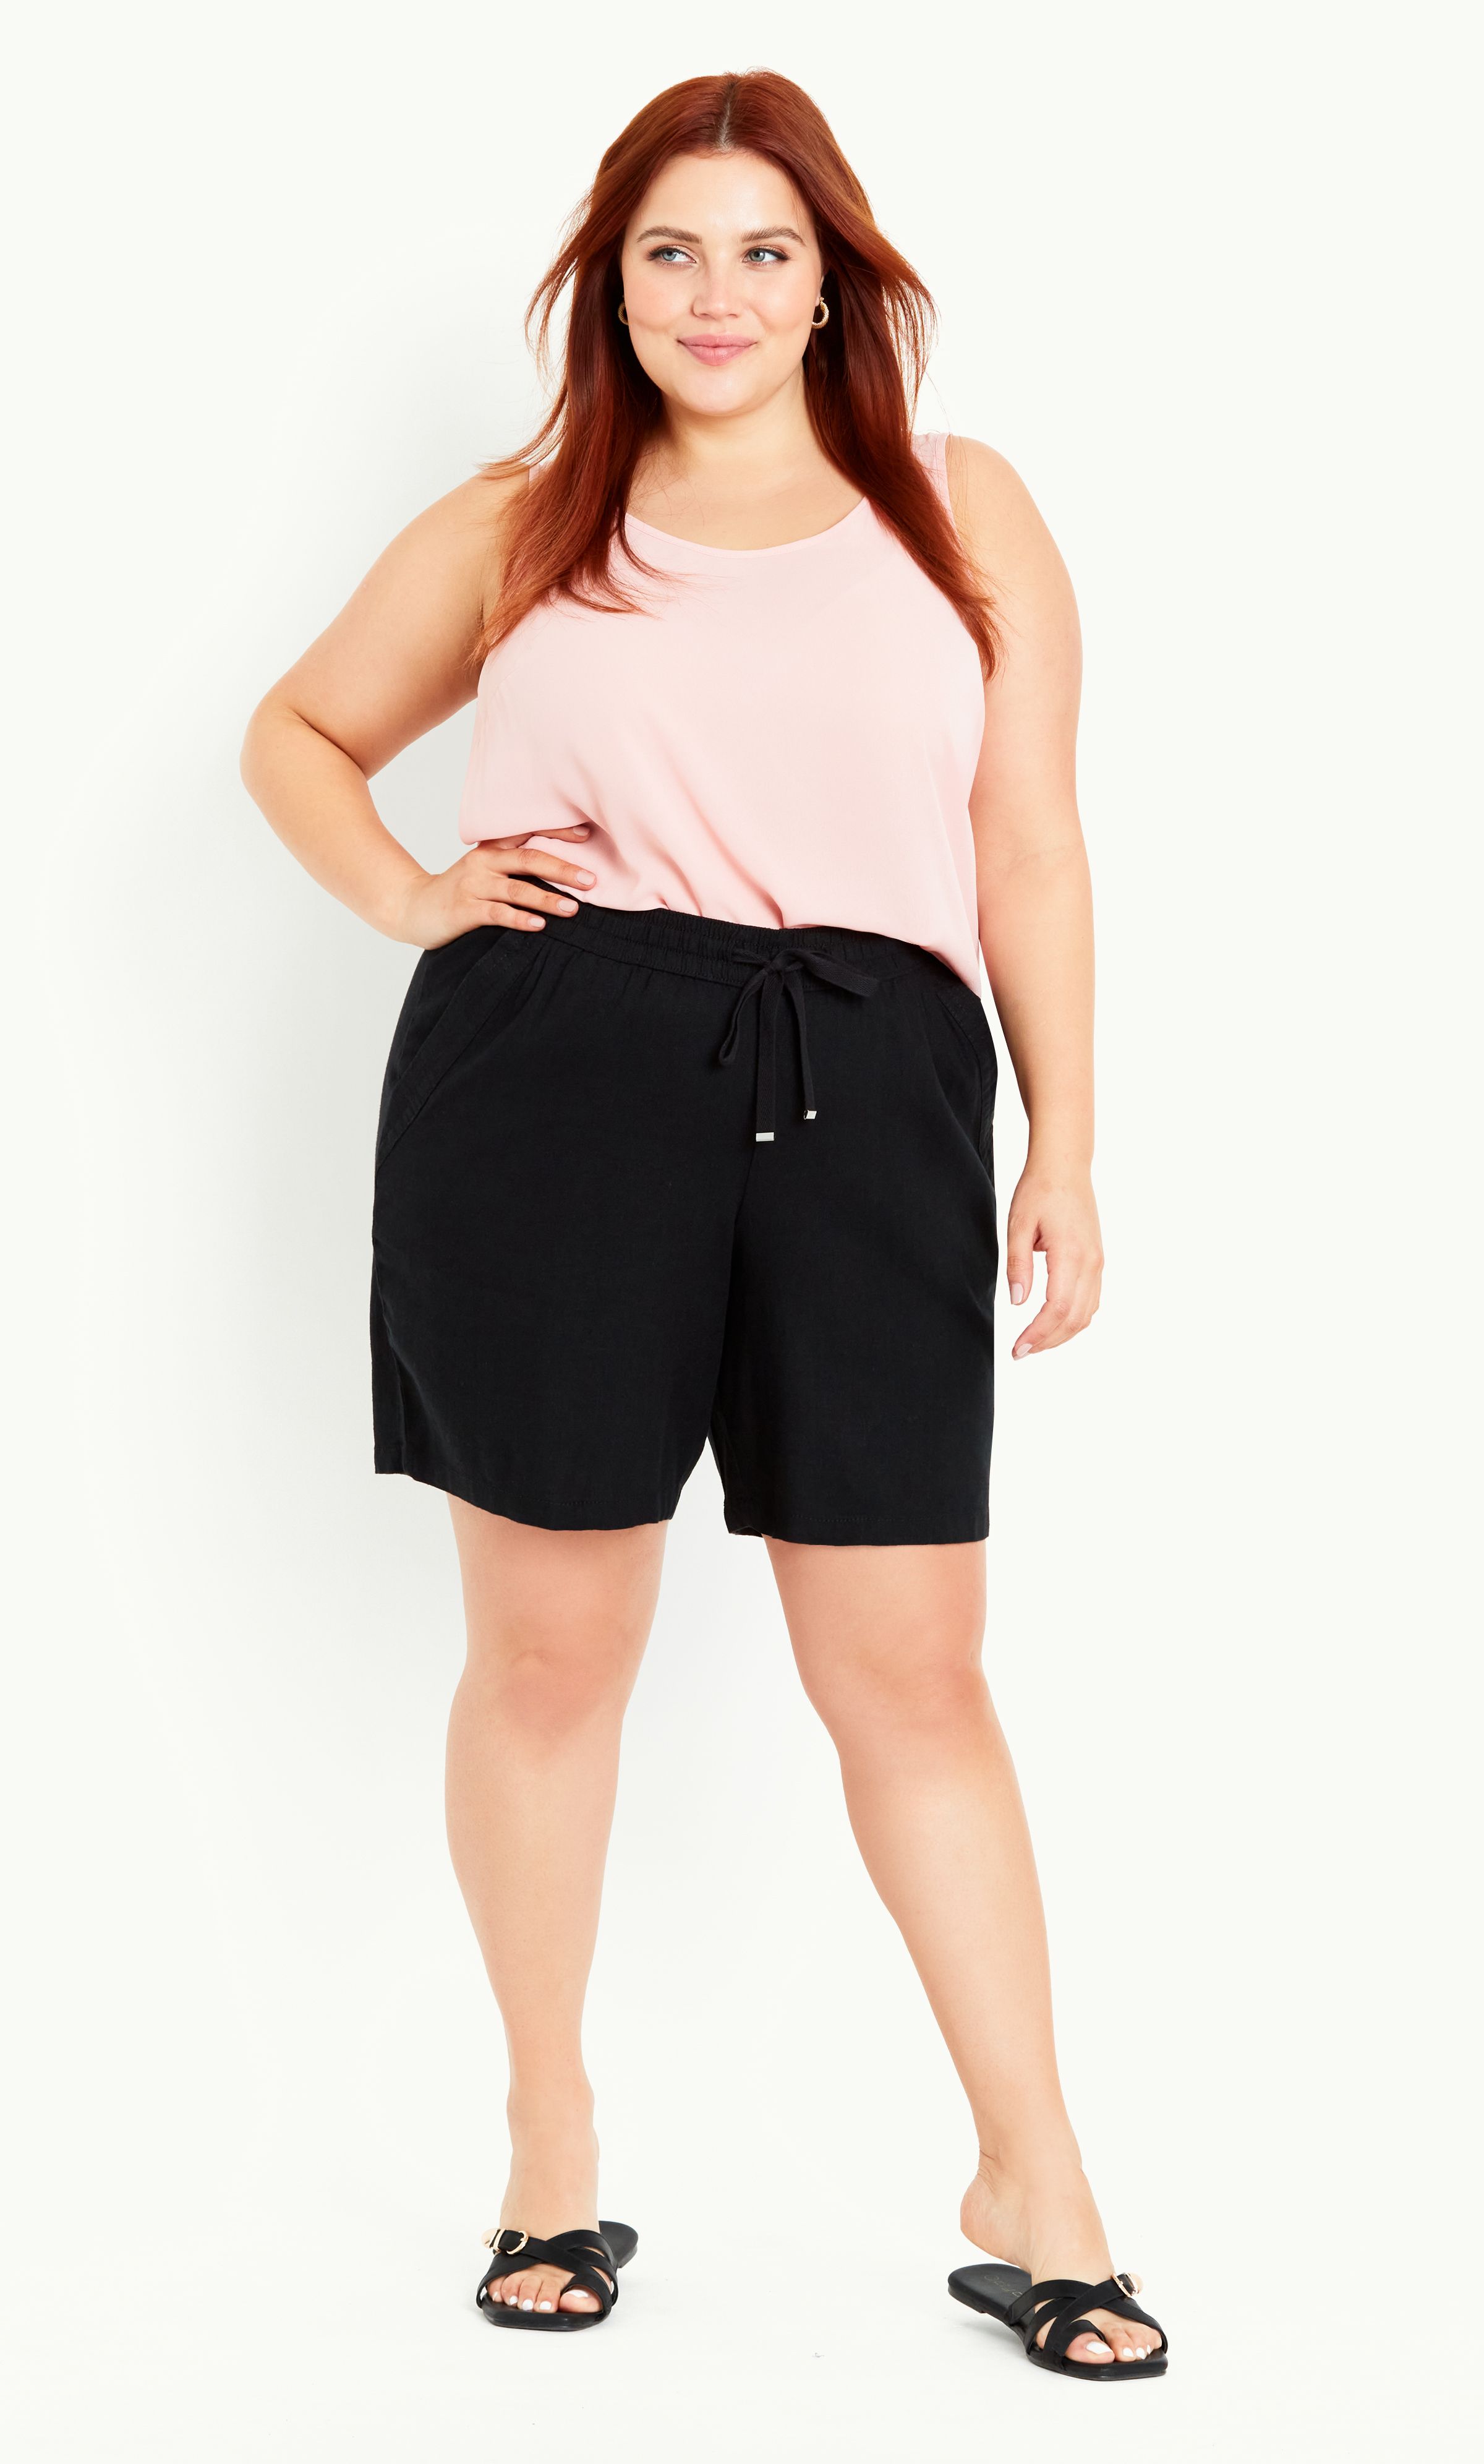 Bring the vacation vibes to your summer style with the Linen Blend Short. Featuring a breezy relaxed fit and functional pockets, these shorts are the perfect blend of comfort and style. Key Features Include: - Elasticated waist with drawstring - Four pockets - Linen blend fabrication - Relaxed leg - Unlined - Pull up style - Above knee length Keep it casual with a white tee and sandals.